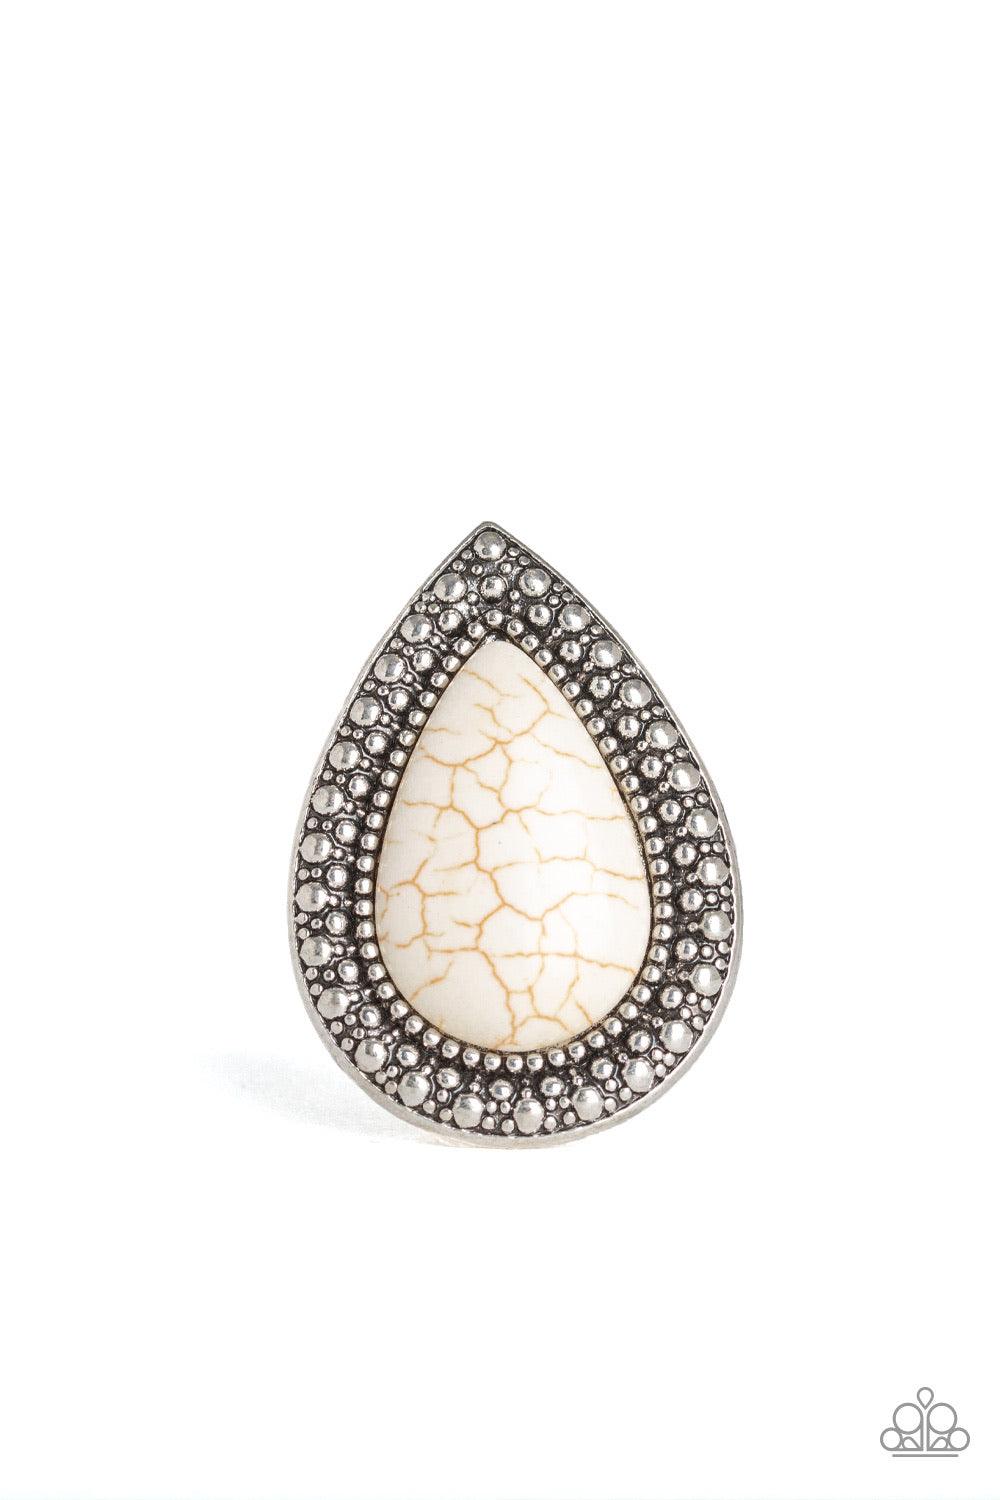 Paparazzi Accessories Santa Fe Storm - White Chiseled into a tranquil teardrop, an oversized white stone is pressed into the center of a shimmery silver frame dotted with radiant studded texture for a dramatic stone look. Features a stretchy band for a fl